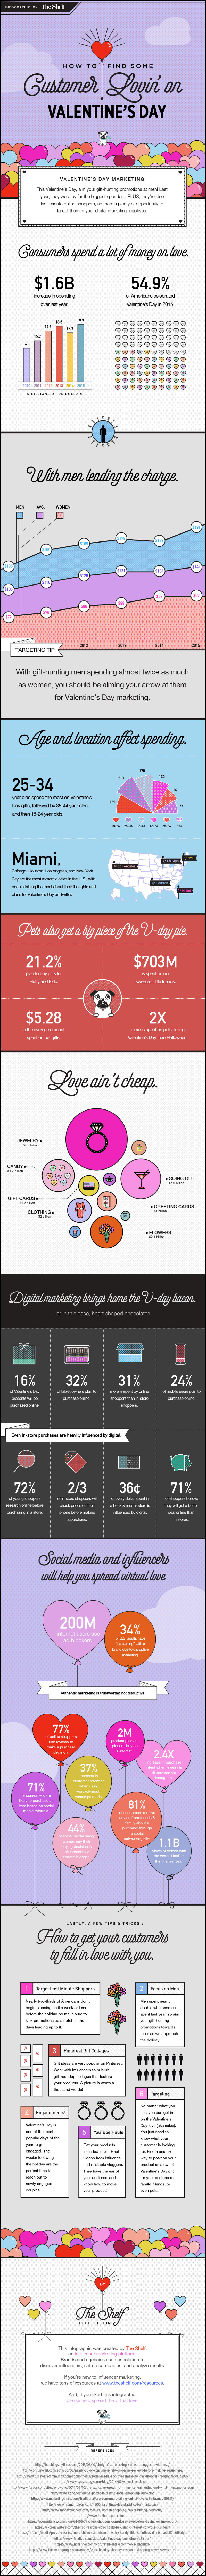 valentine's day infographic for ecommerce